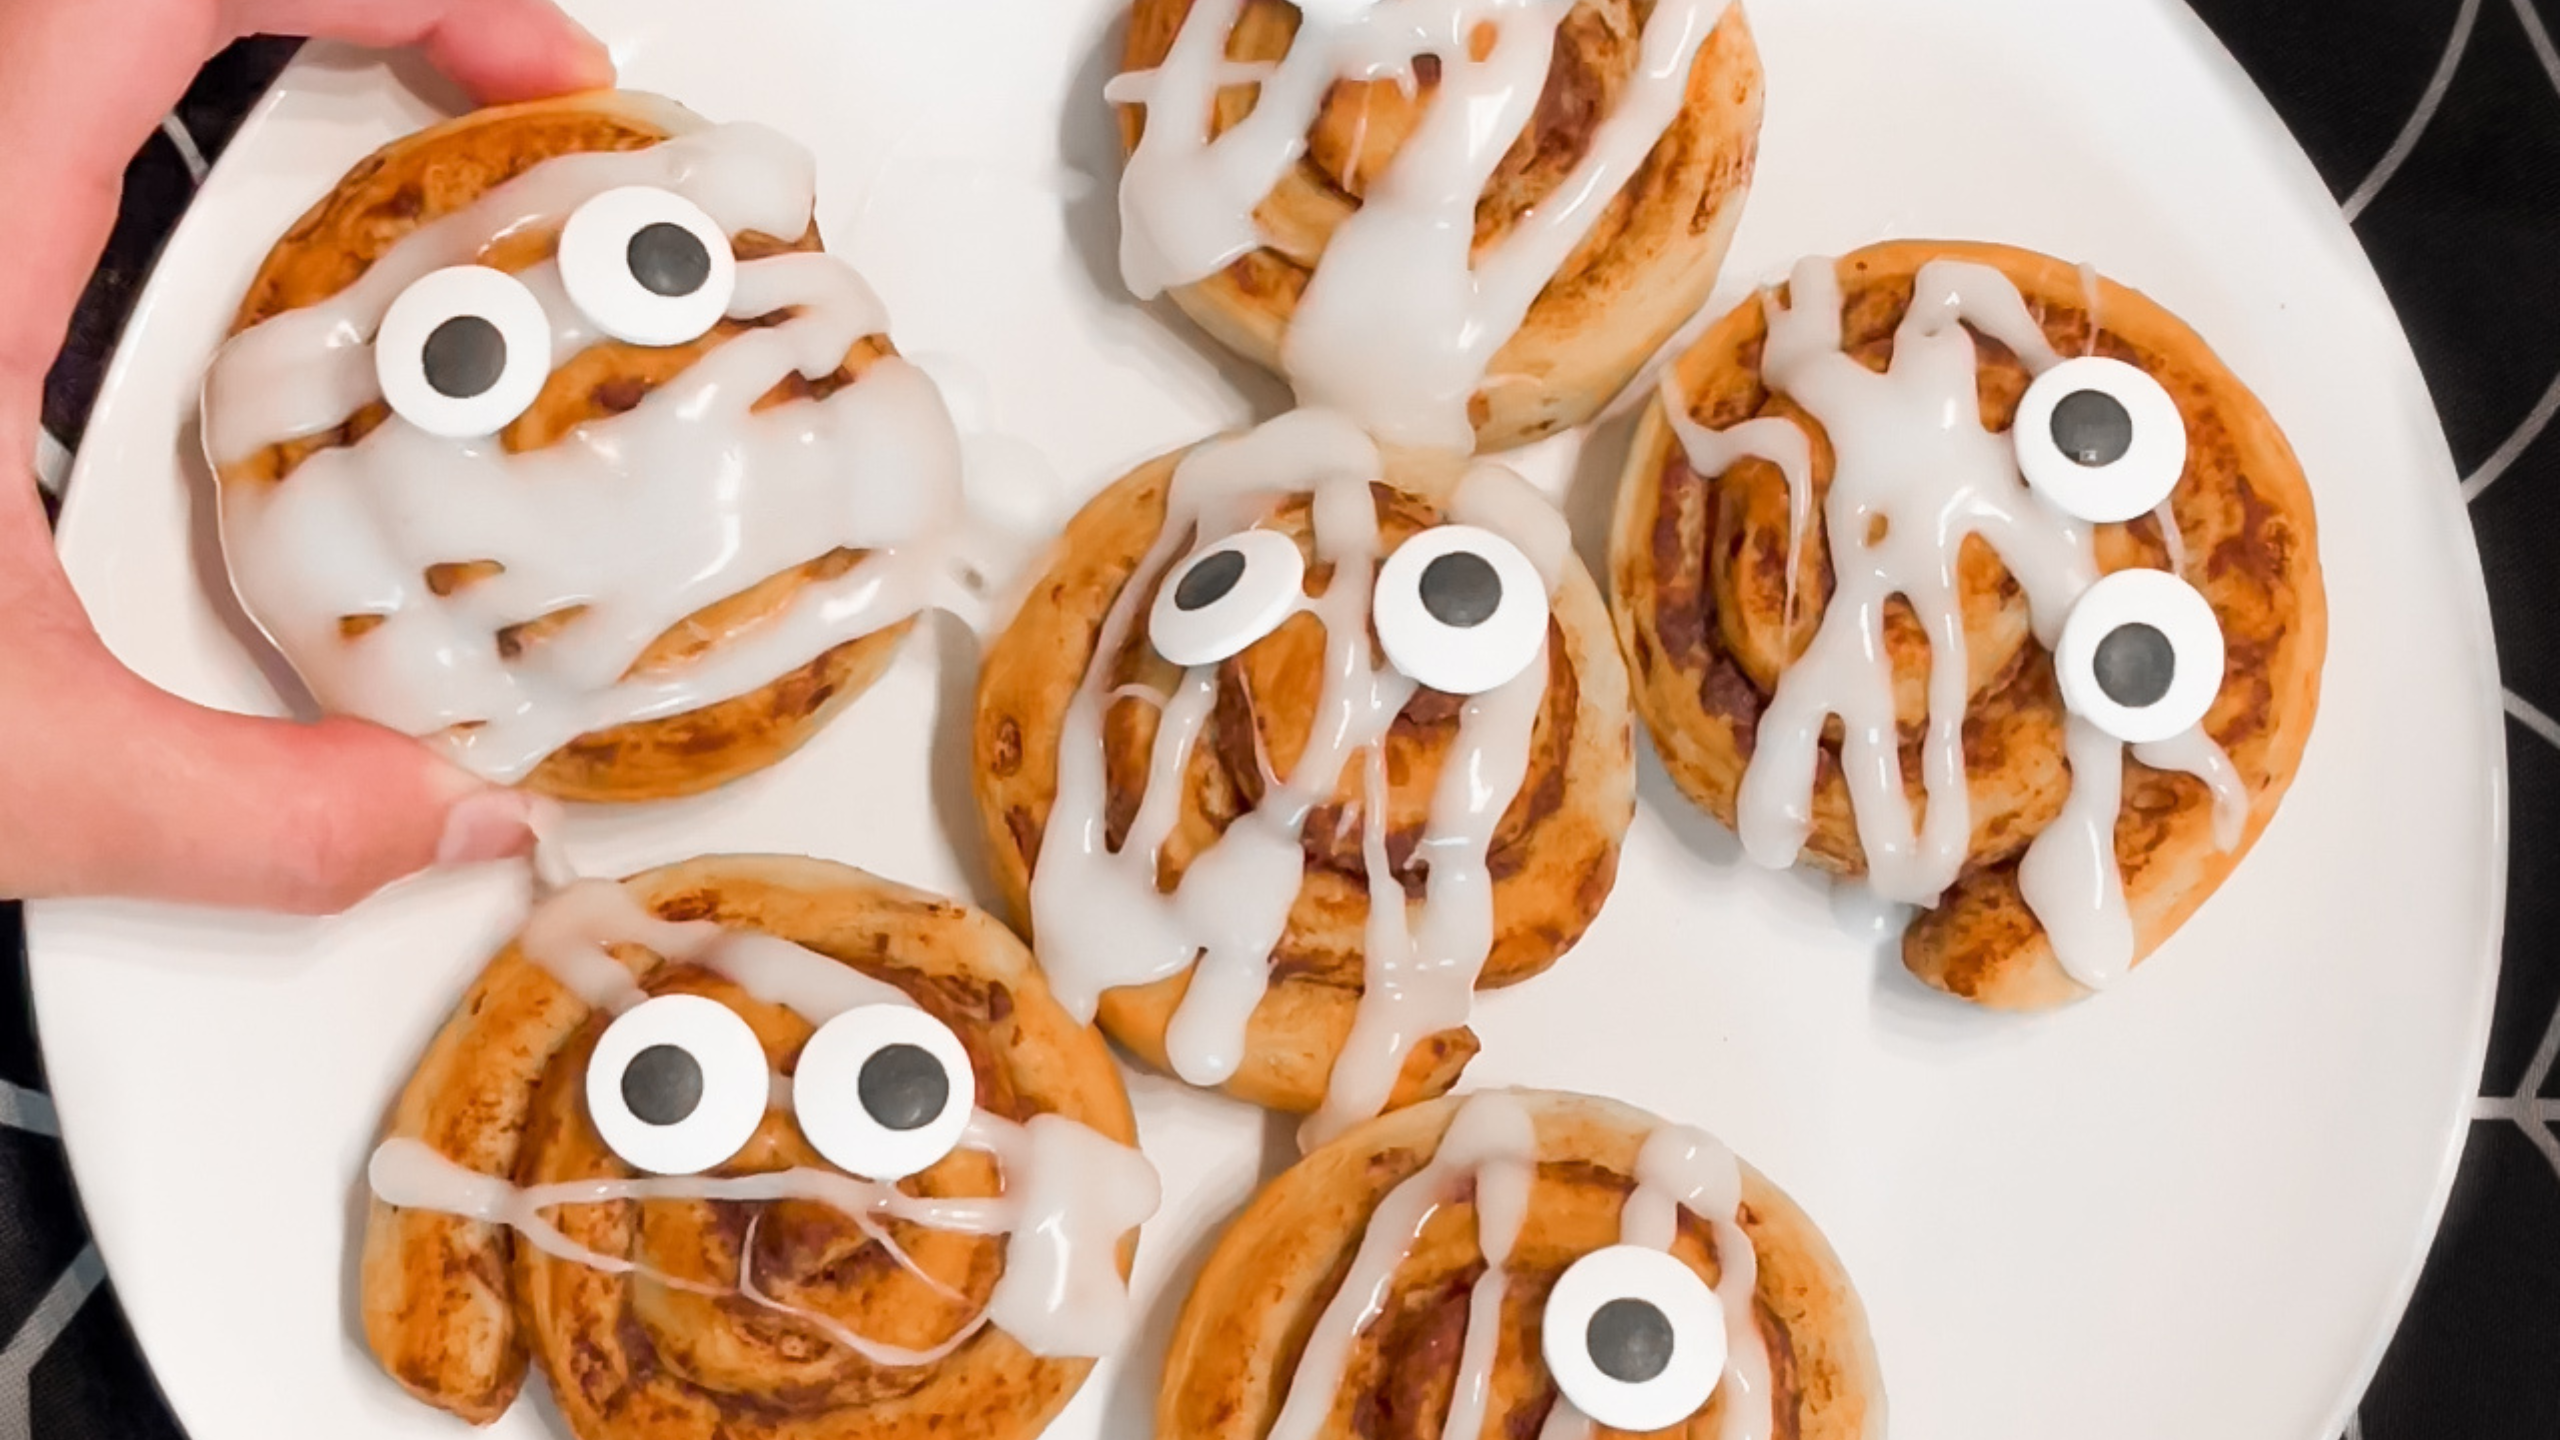 There you have it, the simplest and most adorable Halloween breakfast idea. Quick & Easy Mummy Cinnamon Rolls are the perfect way to add a touch of Halloween spirit to your morning